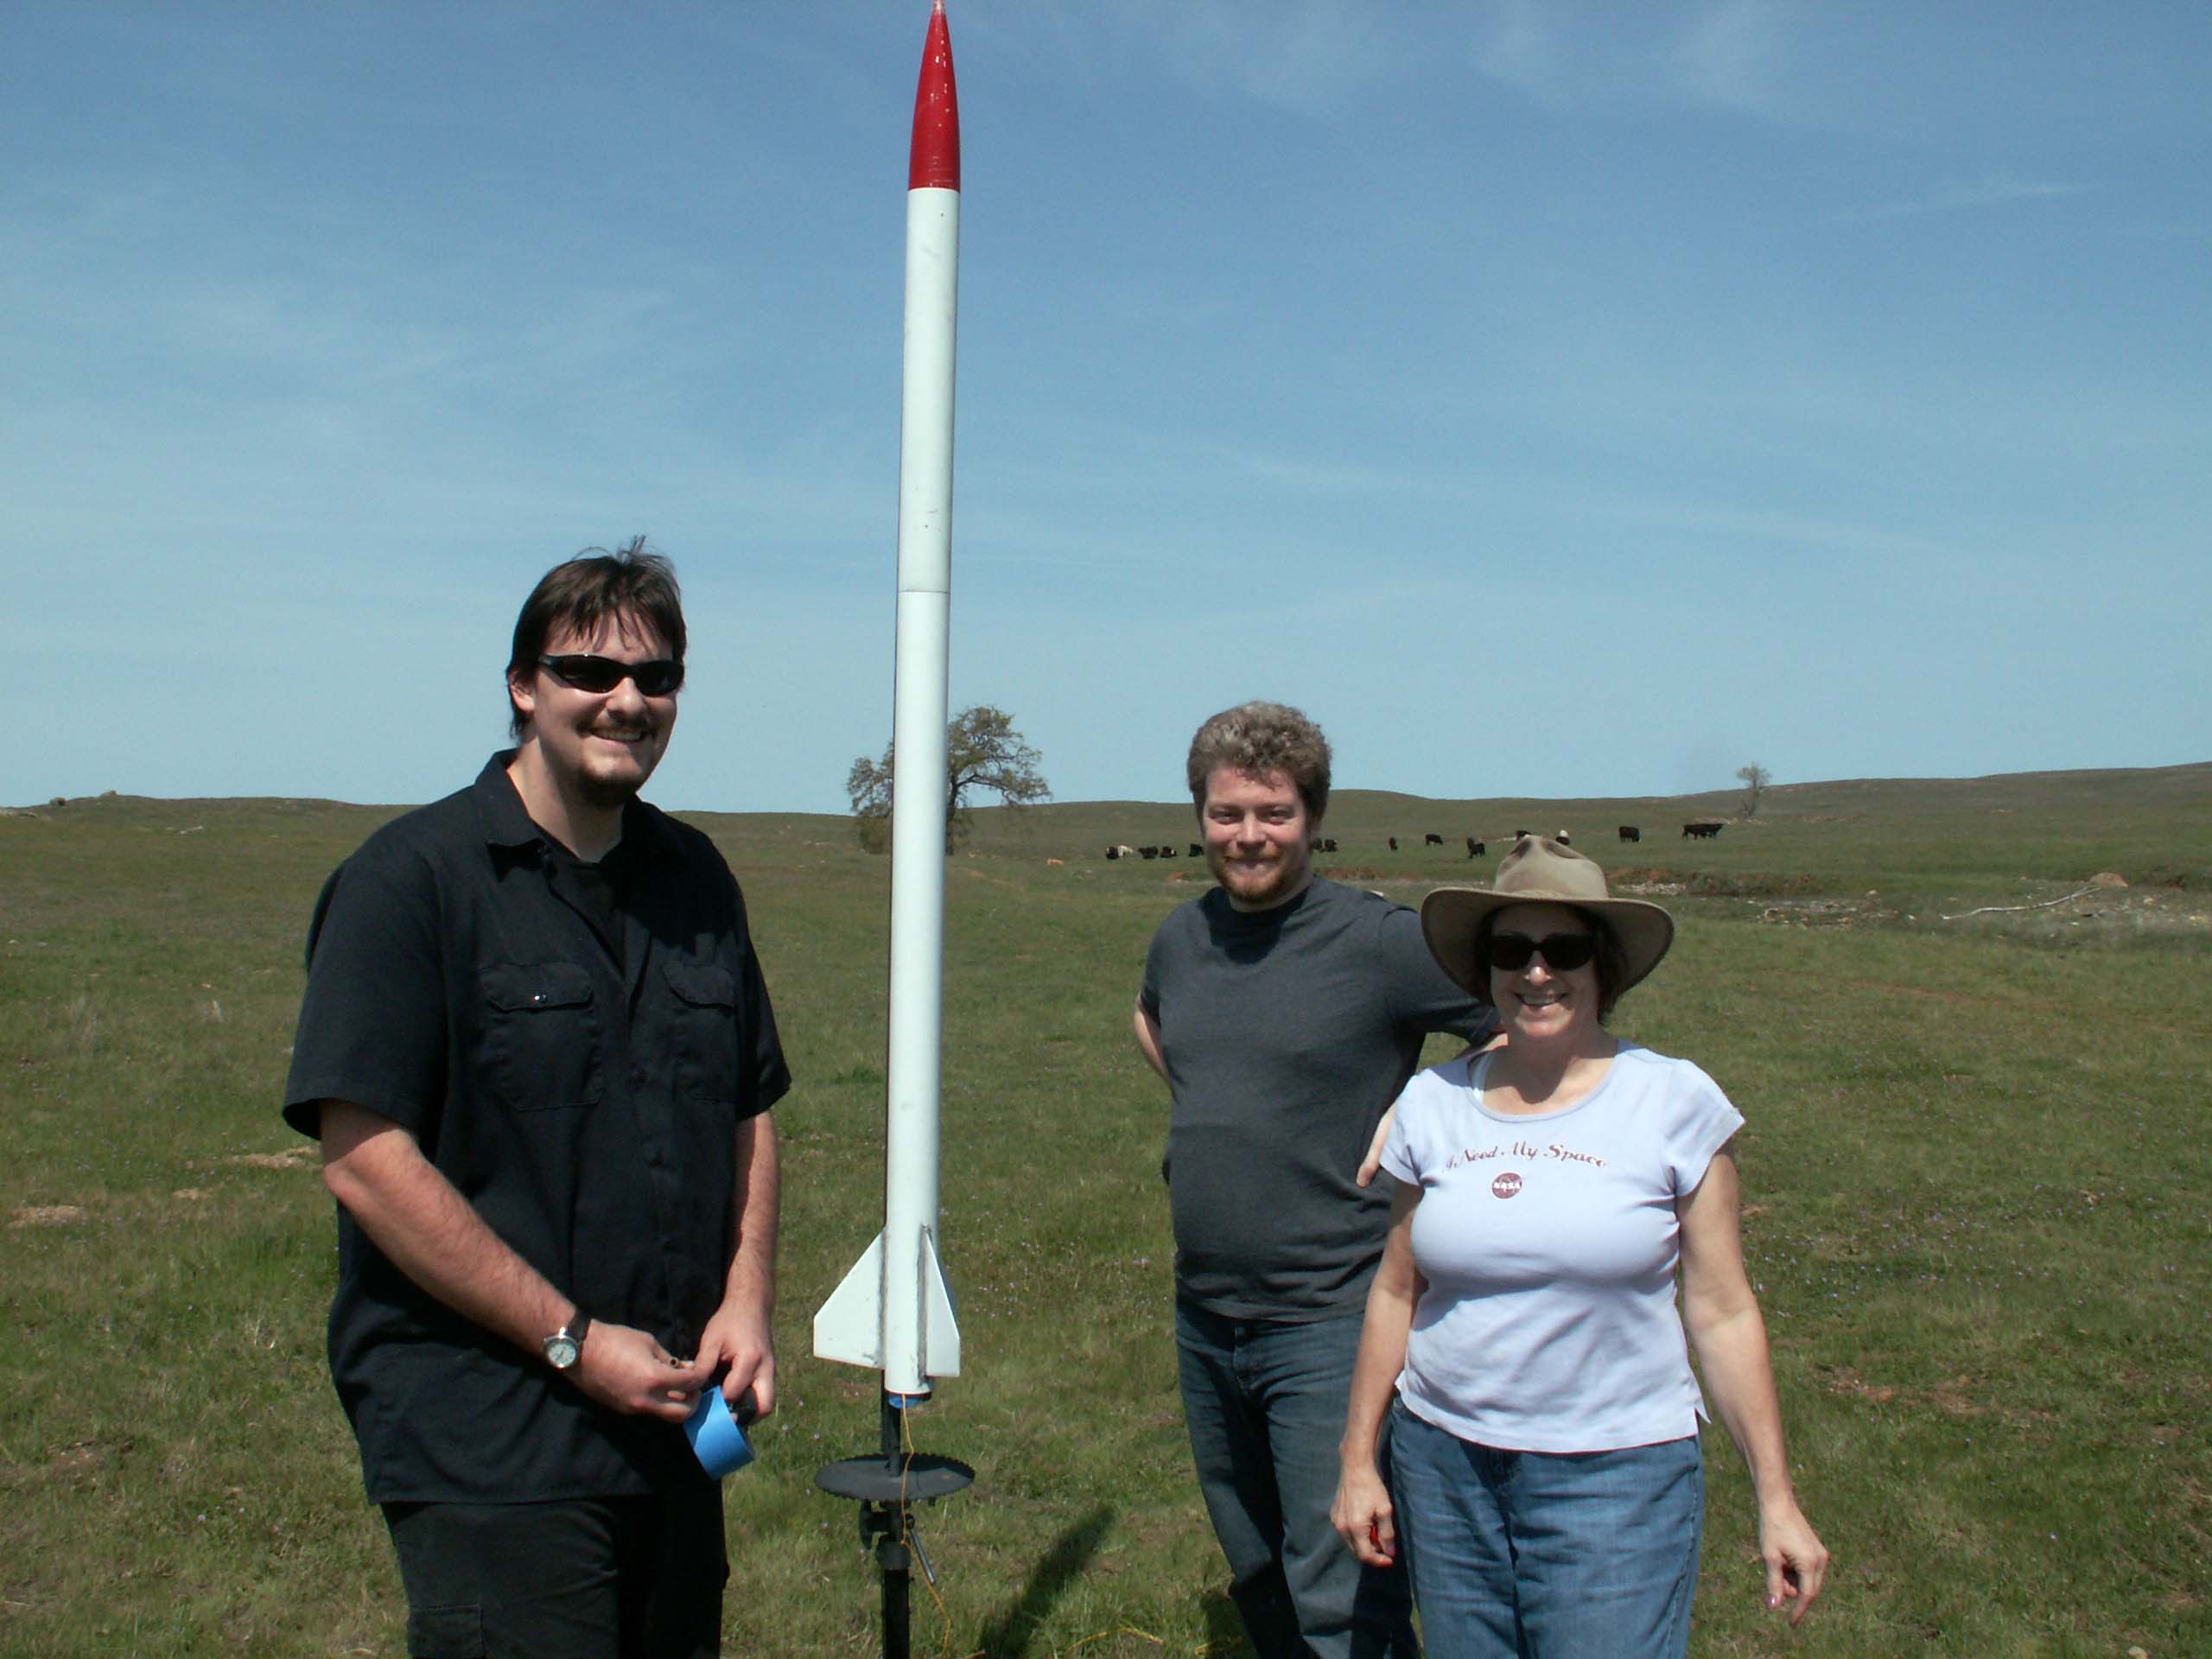 From left to right; Kevin Zack, Kevin John, and Dr. Cominsky standing with Kevin John's rocket loaded with a barometric pressure and GPS CanSat and J350 engine.